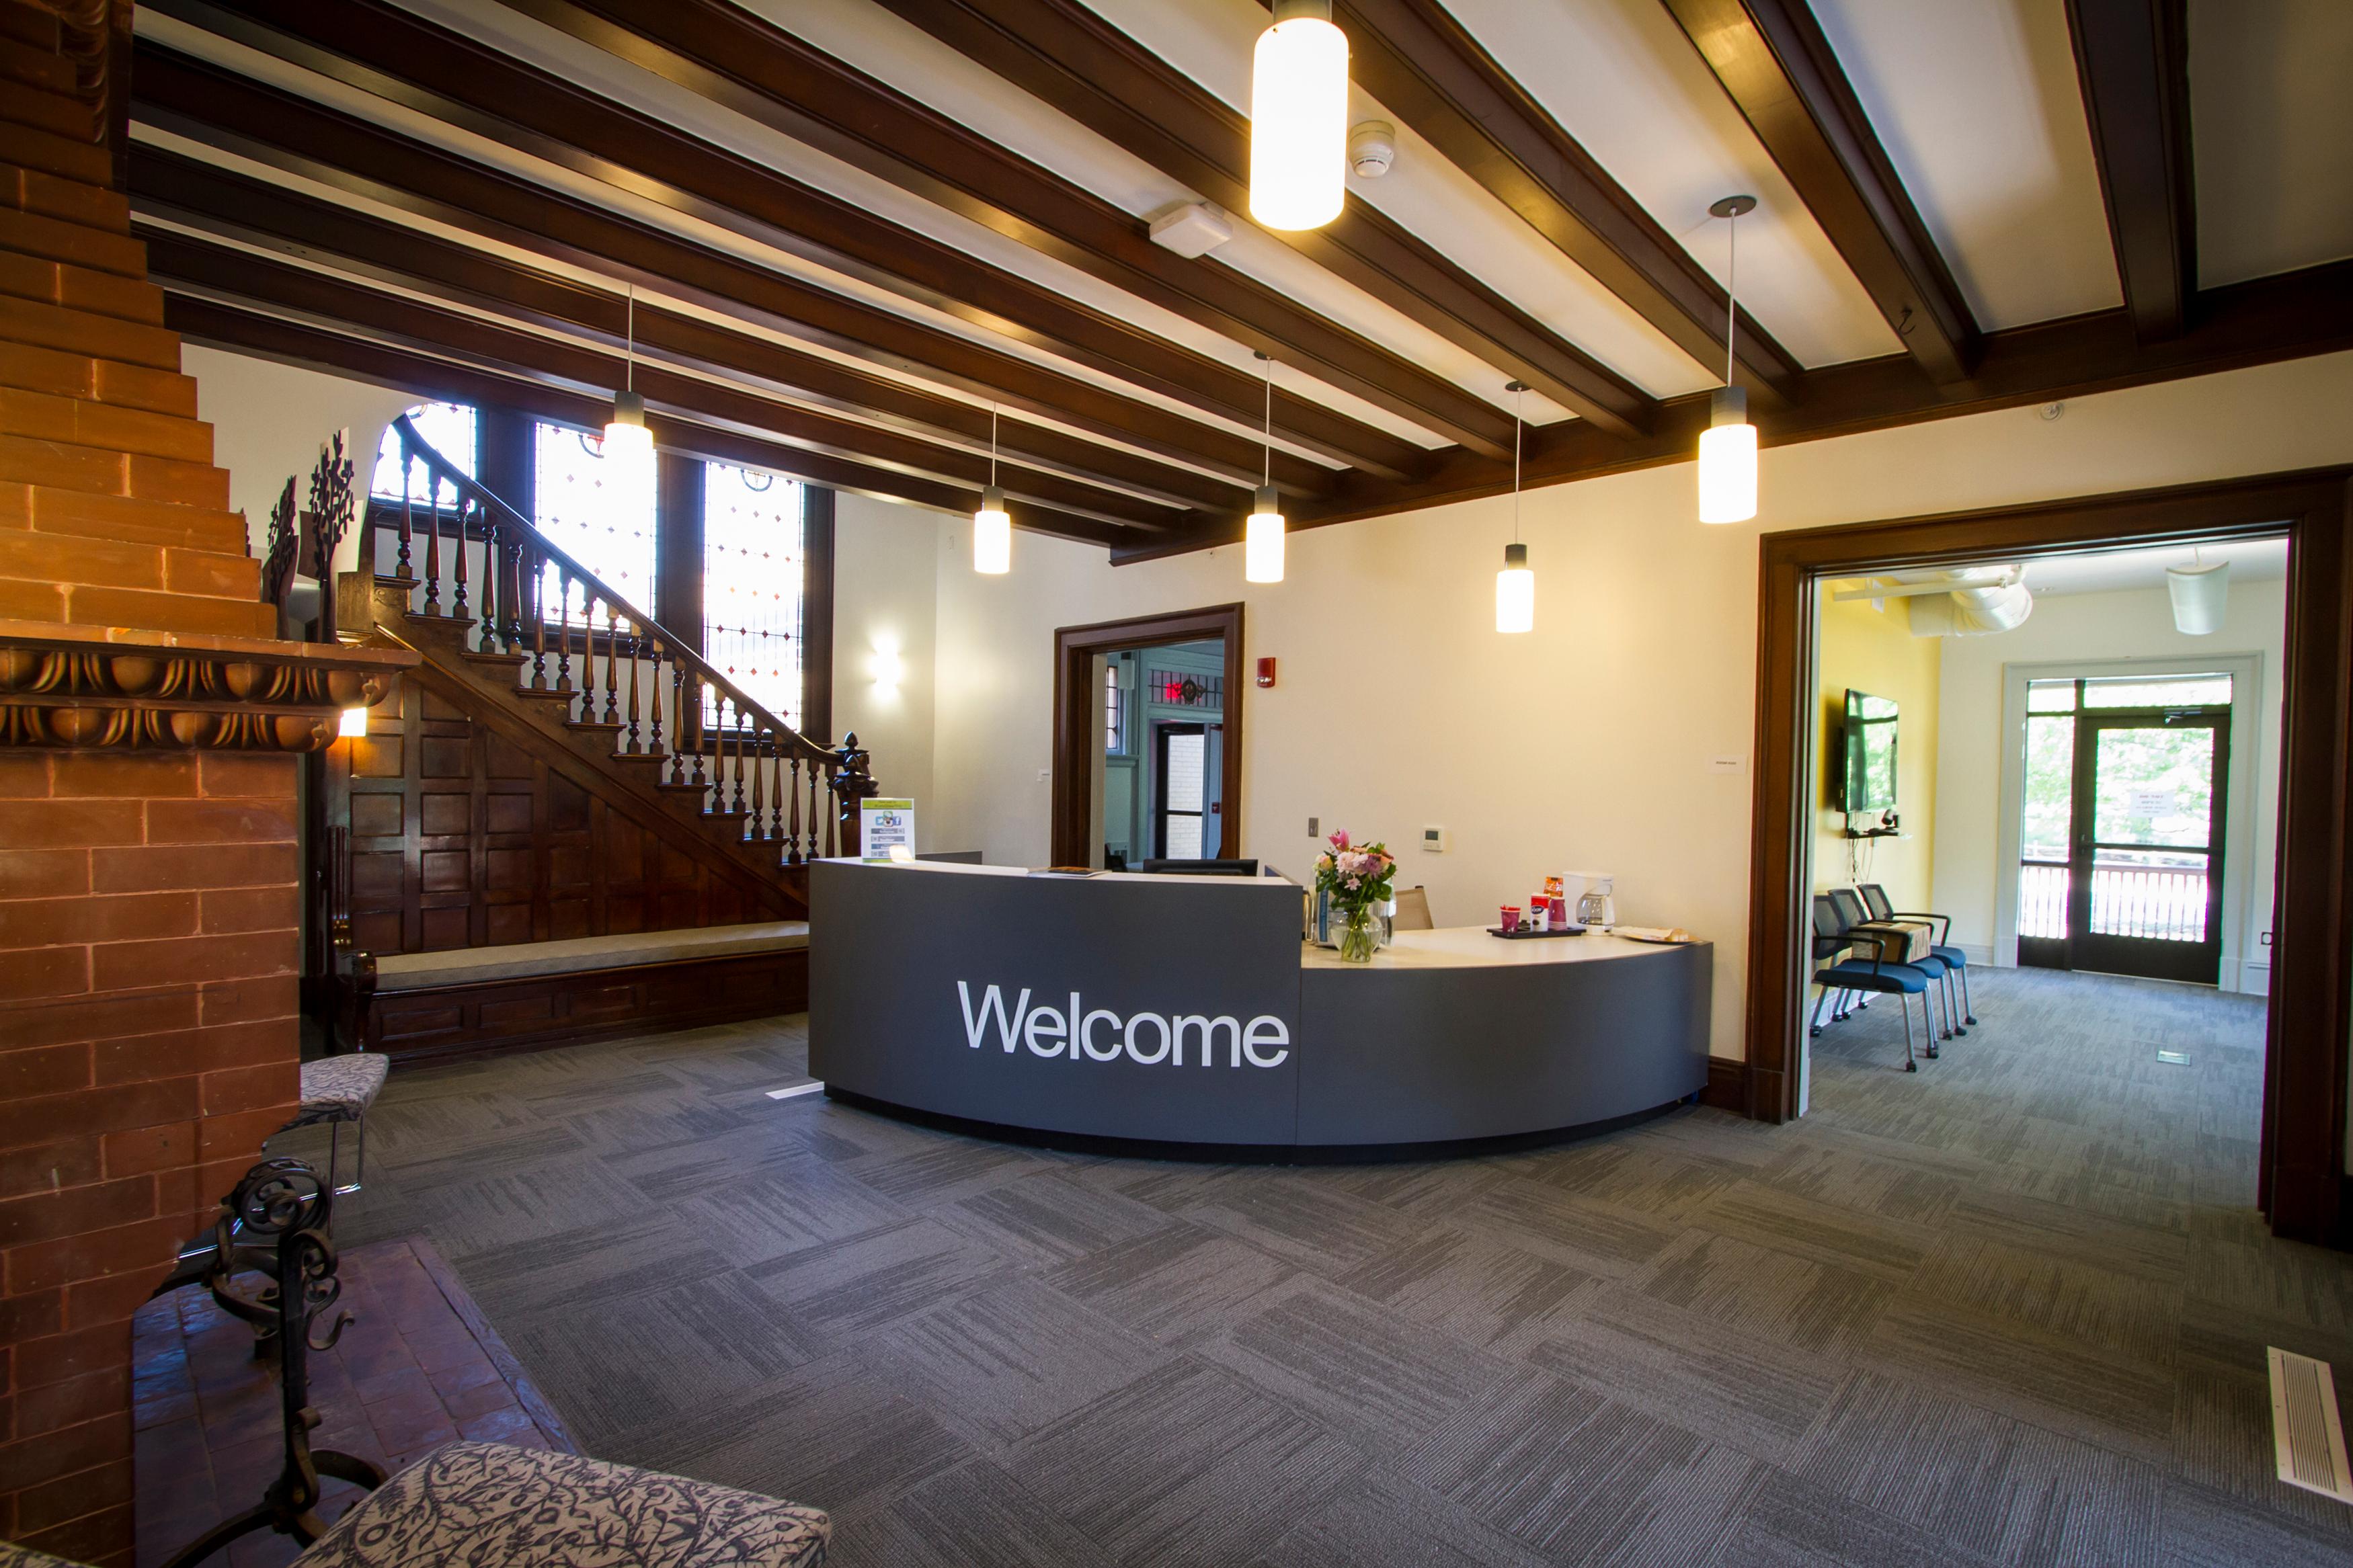 DREW view of the interior renovation of the welcome reception area at Tilghman house_28142.jpg